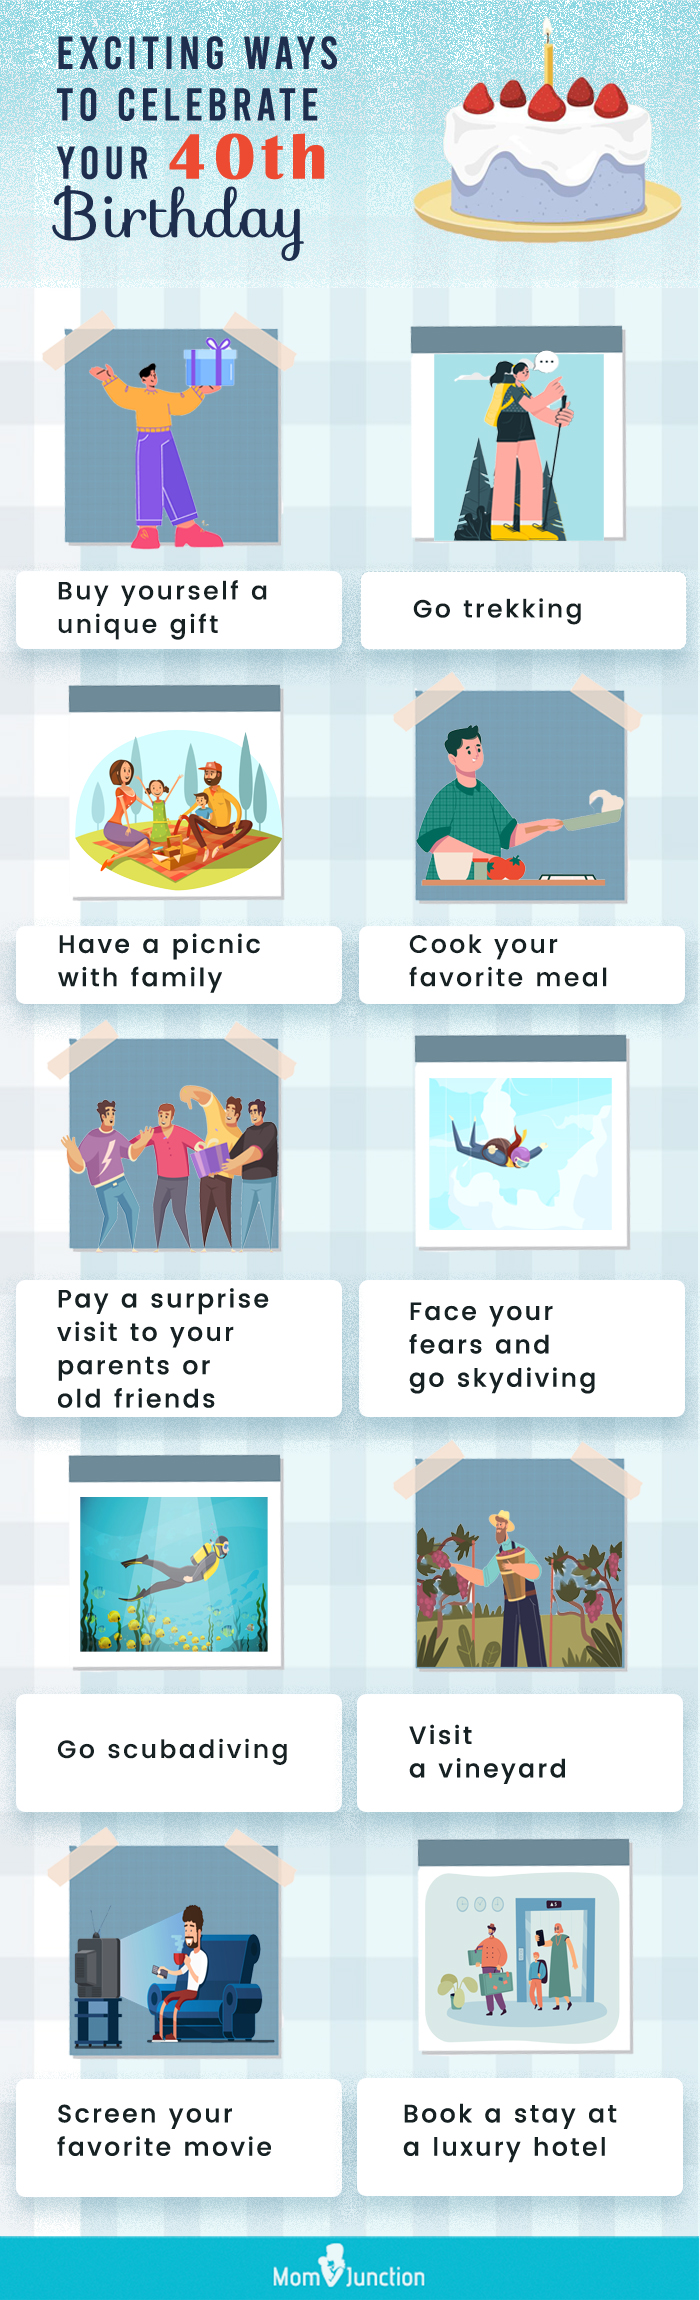 exciting ways to celebrate your 40th birthday (infographic)